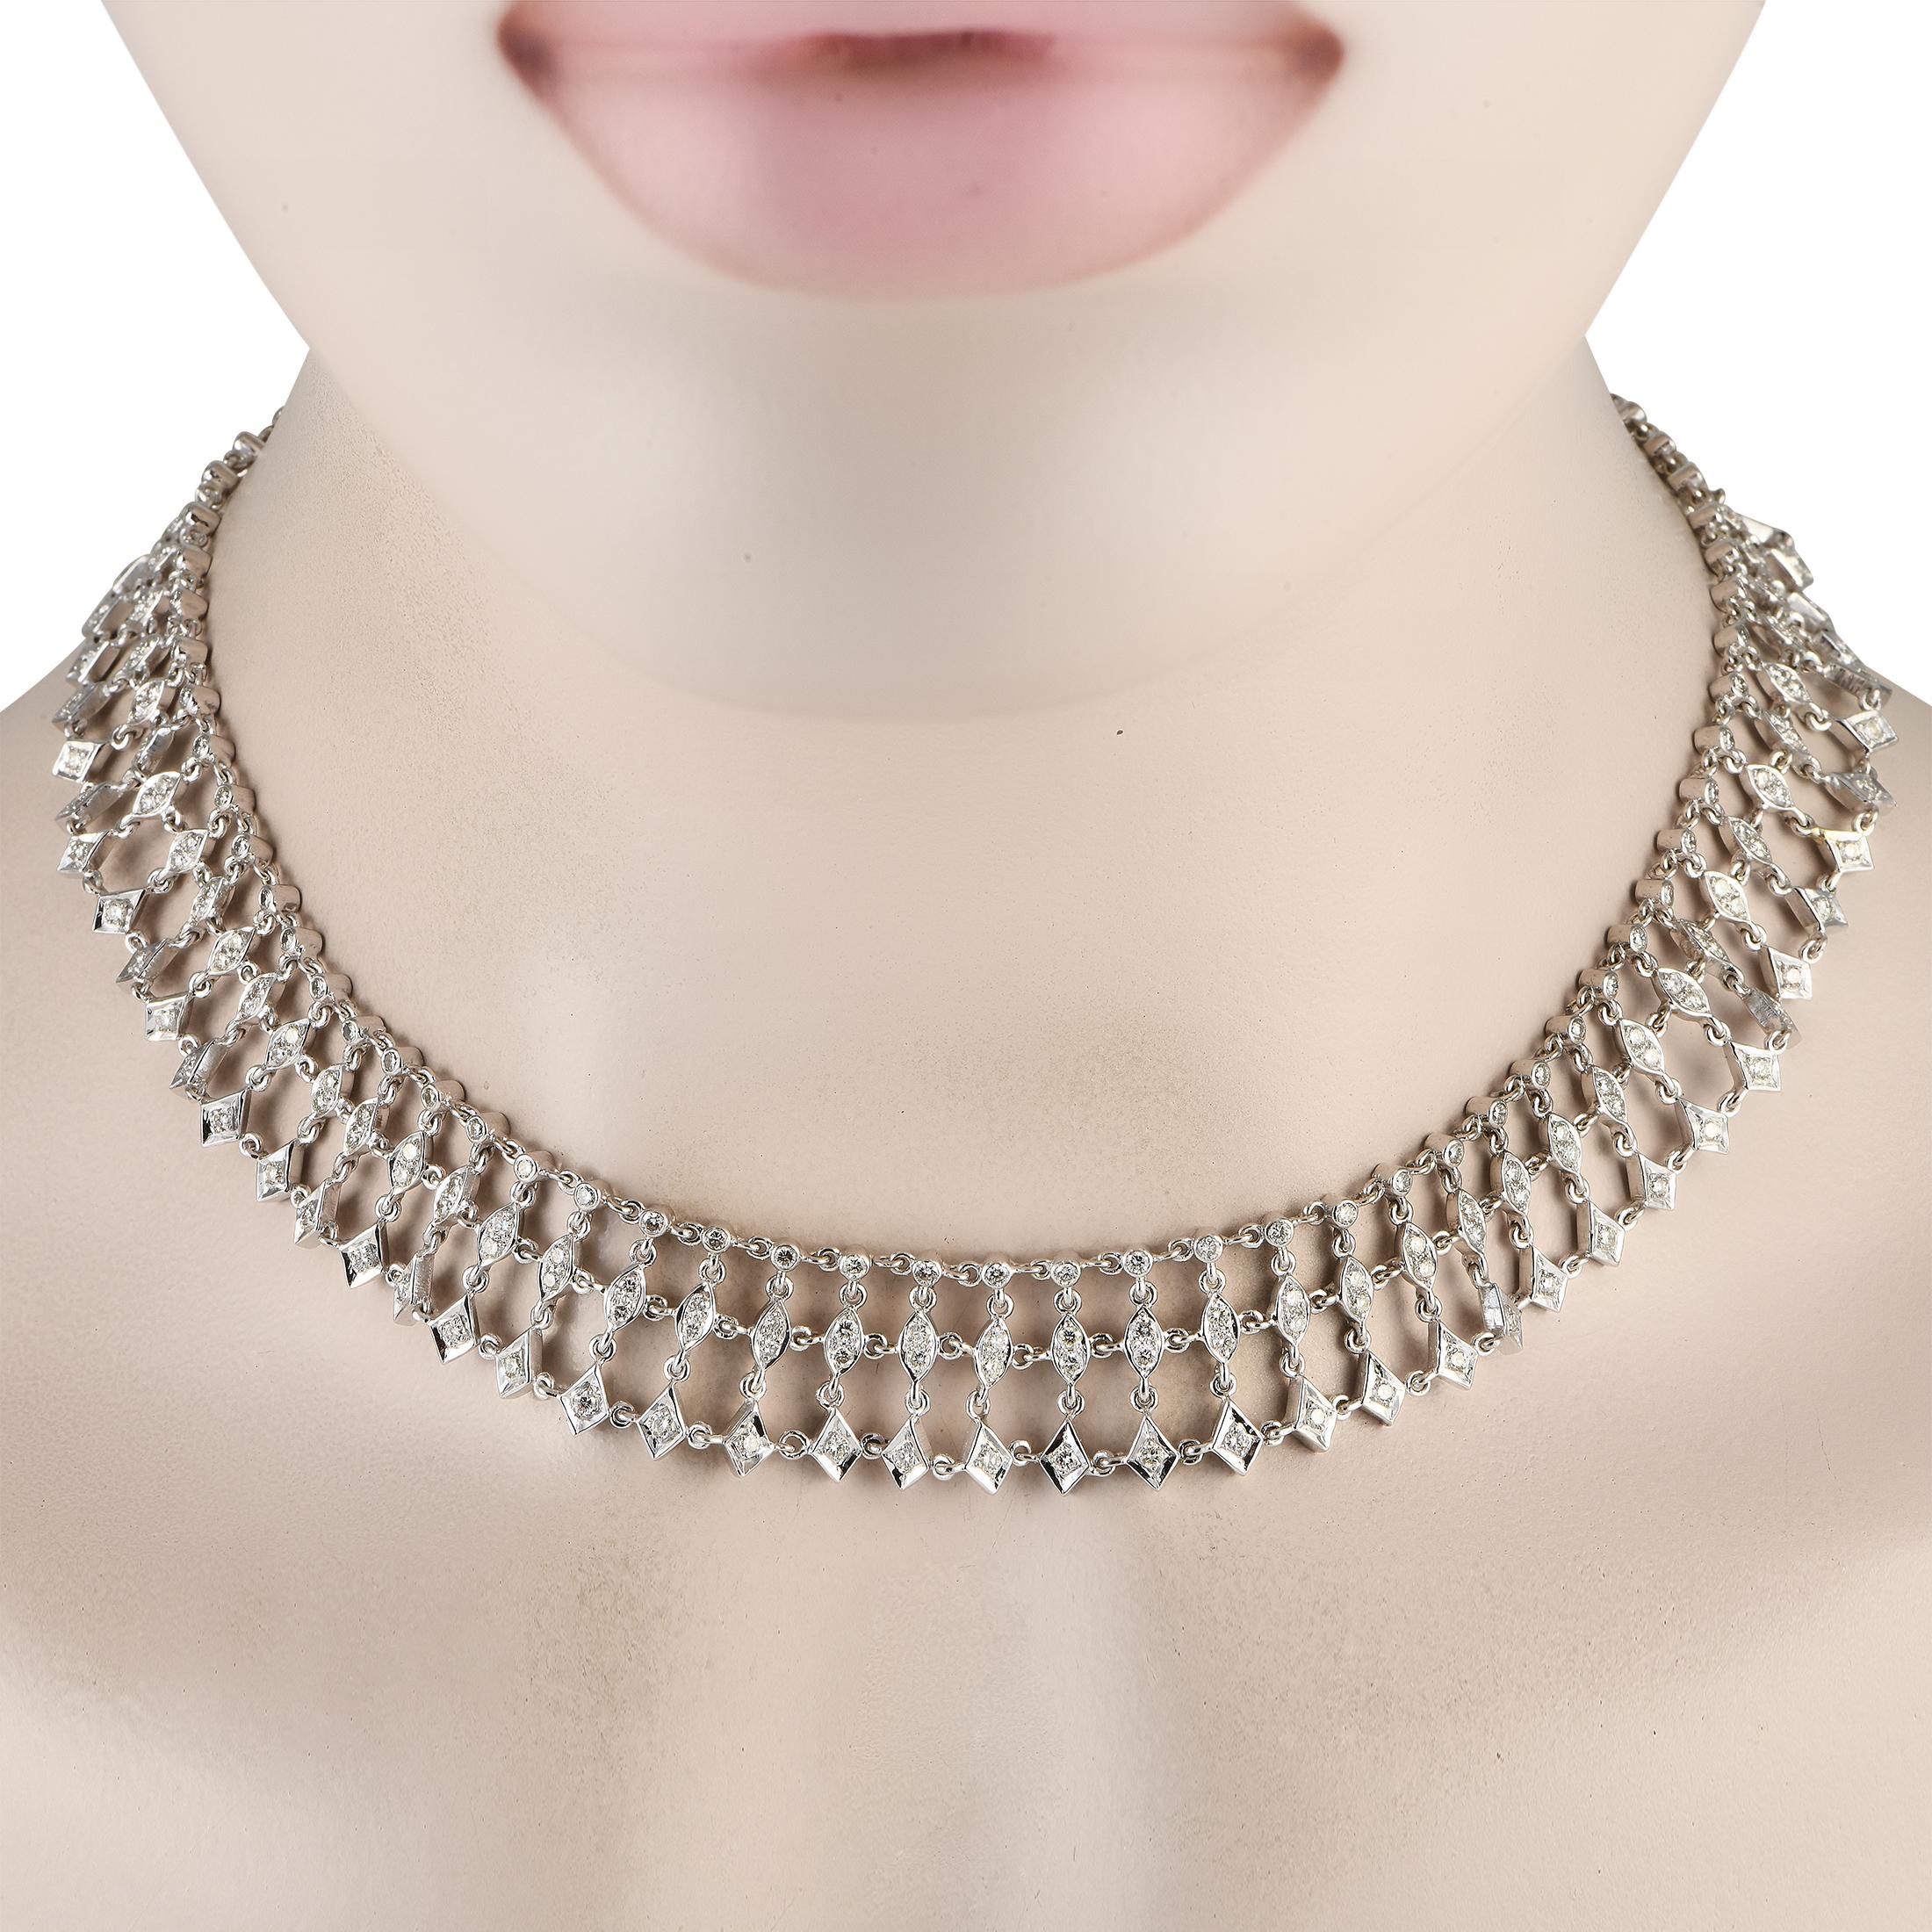 Intricate metalwork and sparkling diamonds with a total weight of 8.53 carats make this lattice collar necklace endlessly impressive. Ideal for even your most special occasions, this exquisite accessory measures 13.5 long and comes complete with a